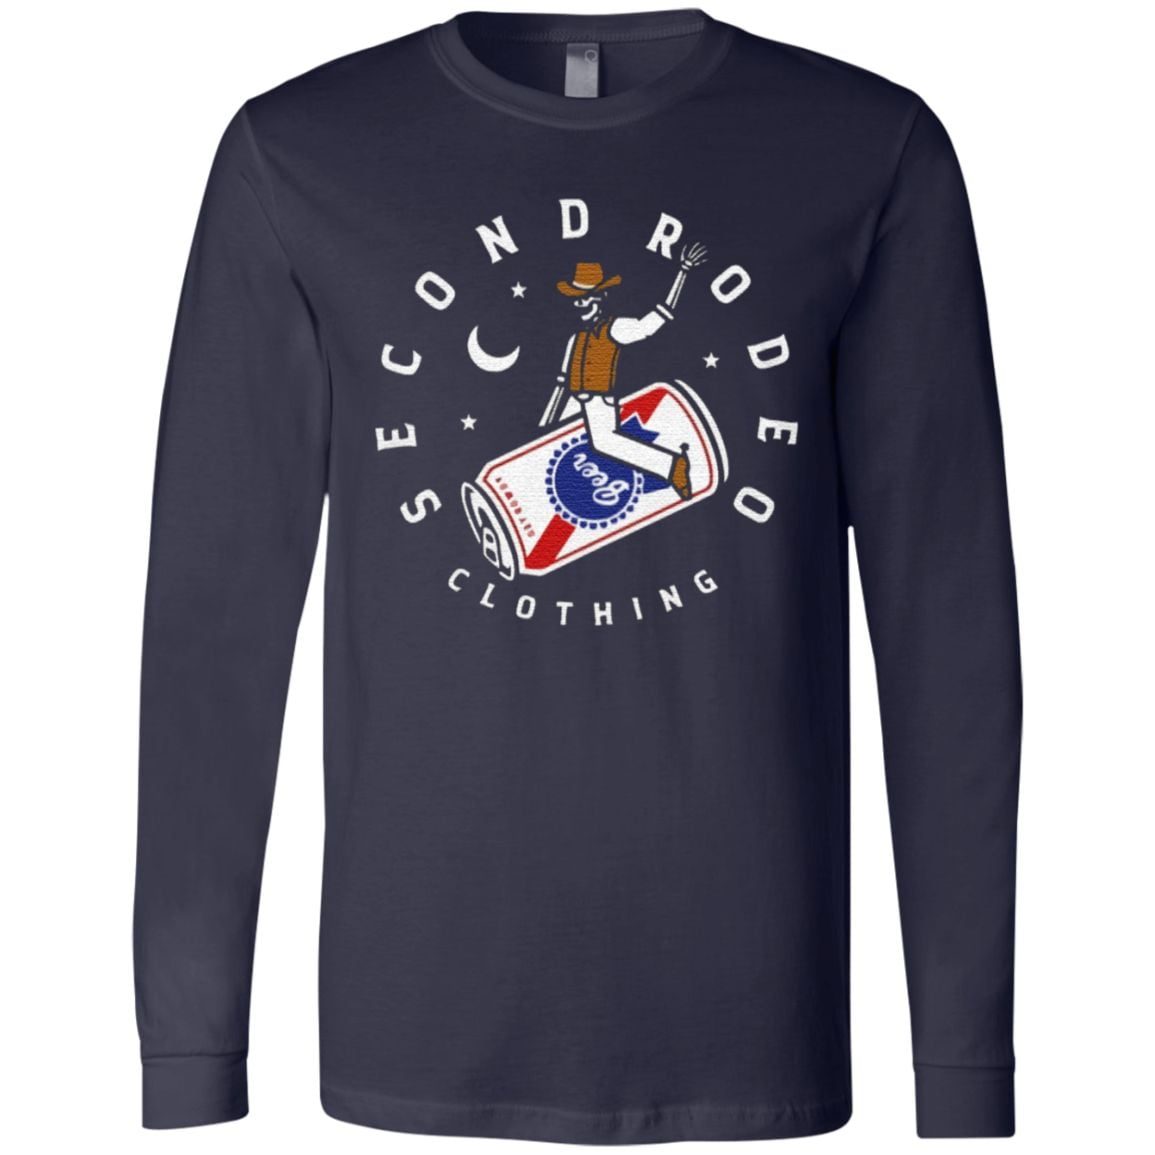 secondrodeo clothing 2020 t shirt